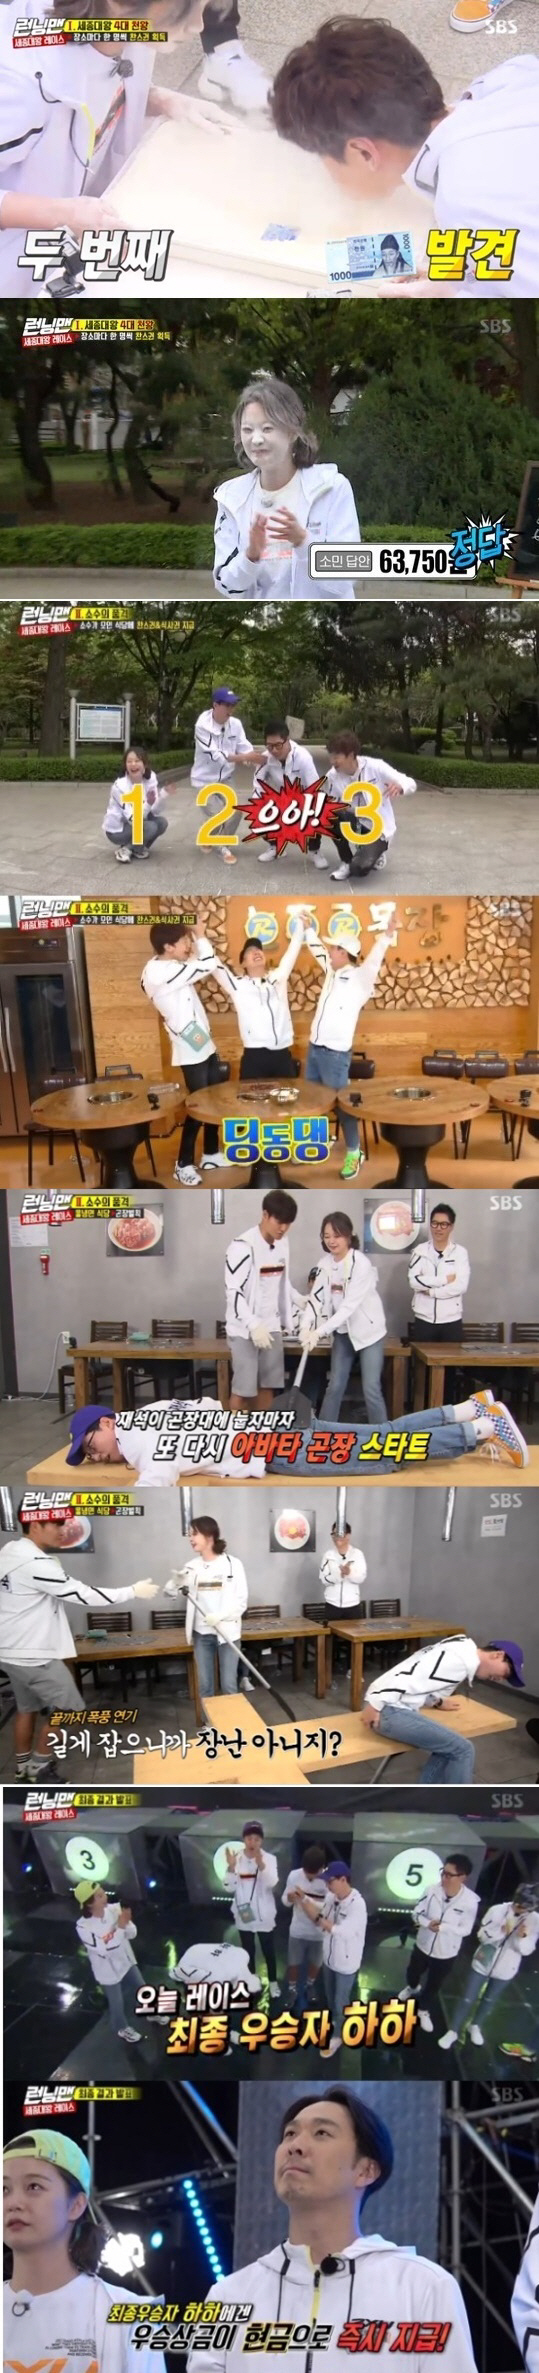 SBS Running Man won the final championship with only one problem.According to Nielsen Korea, the ratings agency, Running Man, which was broadcast on the 12th, ranked first in the same time zone with a 3.5 percent increase in 2049 target ratings, an important indicator of major advertising officials, by 0.8 percent from last week (based on the second part of the Seoul Capital Areas audience ratings).The average audience rating also rose vertically, recording 4.5% in the first part and 6.9% in the second part (based on the audience rating of households in the Seoul Seoul Capital Area), and the highest audience rating per minute rose to 7.8%.On this day, the broadcast was decorated with a pleasant Sejong the Great Enigma Race, and the fierce mission confrontation of the members toward the championship was held, and the defeat team was laughed at the penalty of the defeat team.The final mission was the complete reconquest quiz of King Sejong. The members solved various quizzes related to King Sejong in the super-sized penalty set.Yoo Jae-seok struggled, but the final two were Haha and Jeon So-min.In particular, Haha did not meet any problems until the final stage, but won the lucky championship by facing only one problem in the confrontation with Jeon So-min.The scene had the highest audience rating of 7.8% per minute, accounting for the best one minute.Meanwhile, Running Man will start Running Man 9th Anniversary Special Project - Running Man Fan Meeting: Running Zone Project from next weeks broadcast.It is expected that it will be another Legend Project with the special event for domestic fans, which will be a confrontation between the production team and the members.